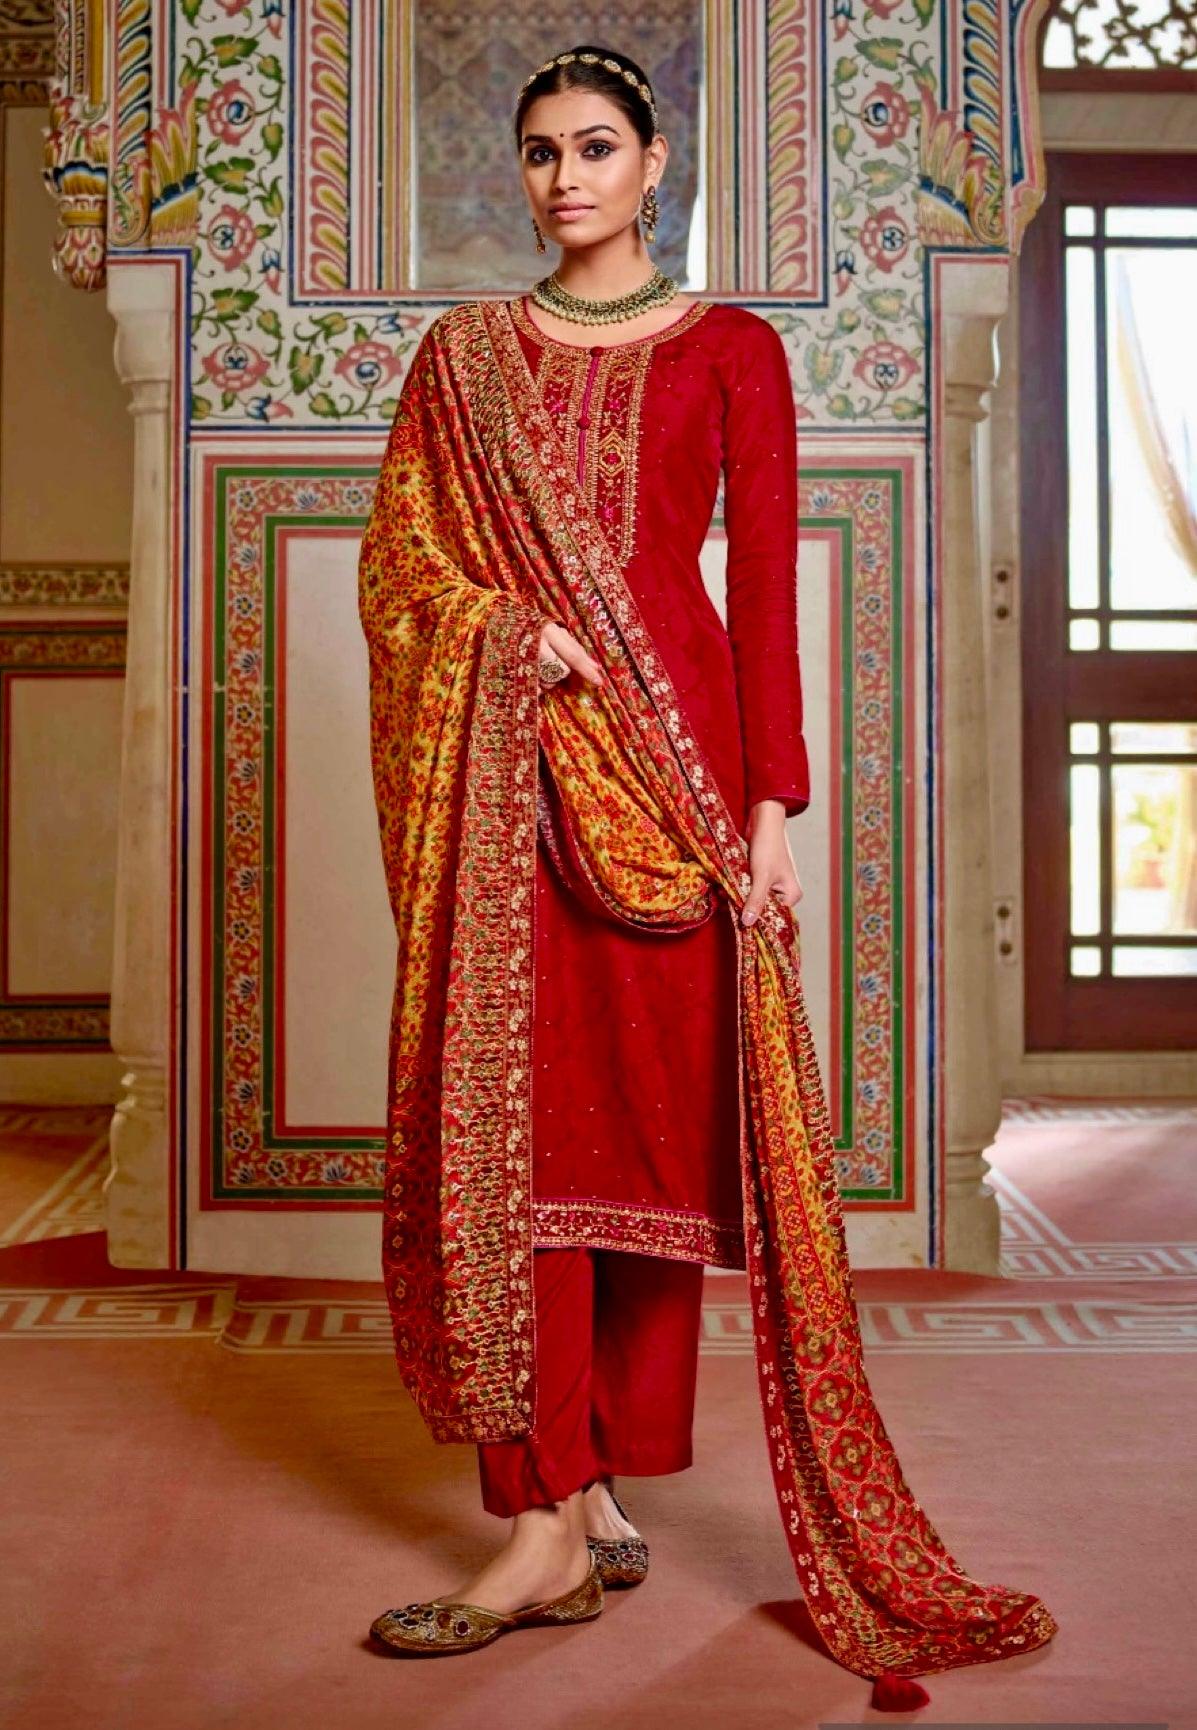 Red Jacquard Silk with embroidery and Sequins dress, Indian Original catalogue Three Piece suit dress with Floral print Chiffon Dupatta, M L - Diana's Fashion Factory